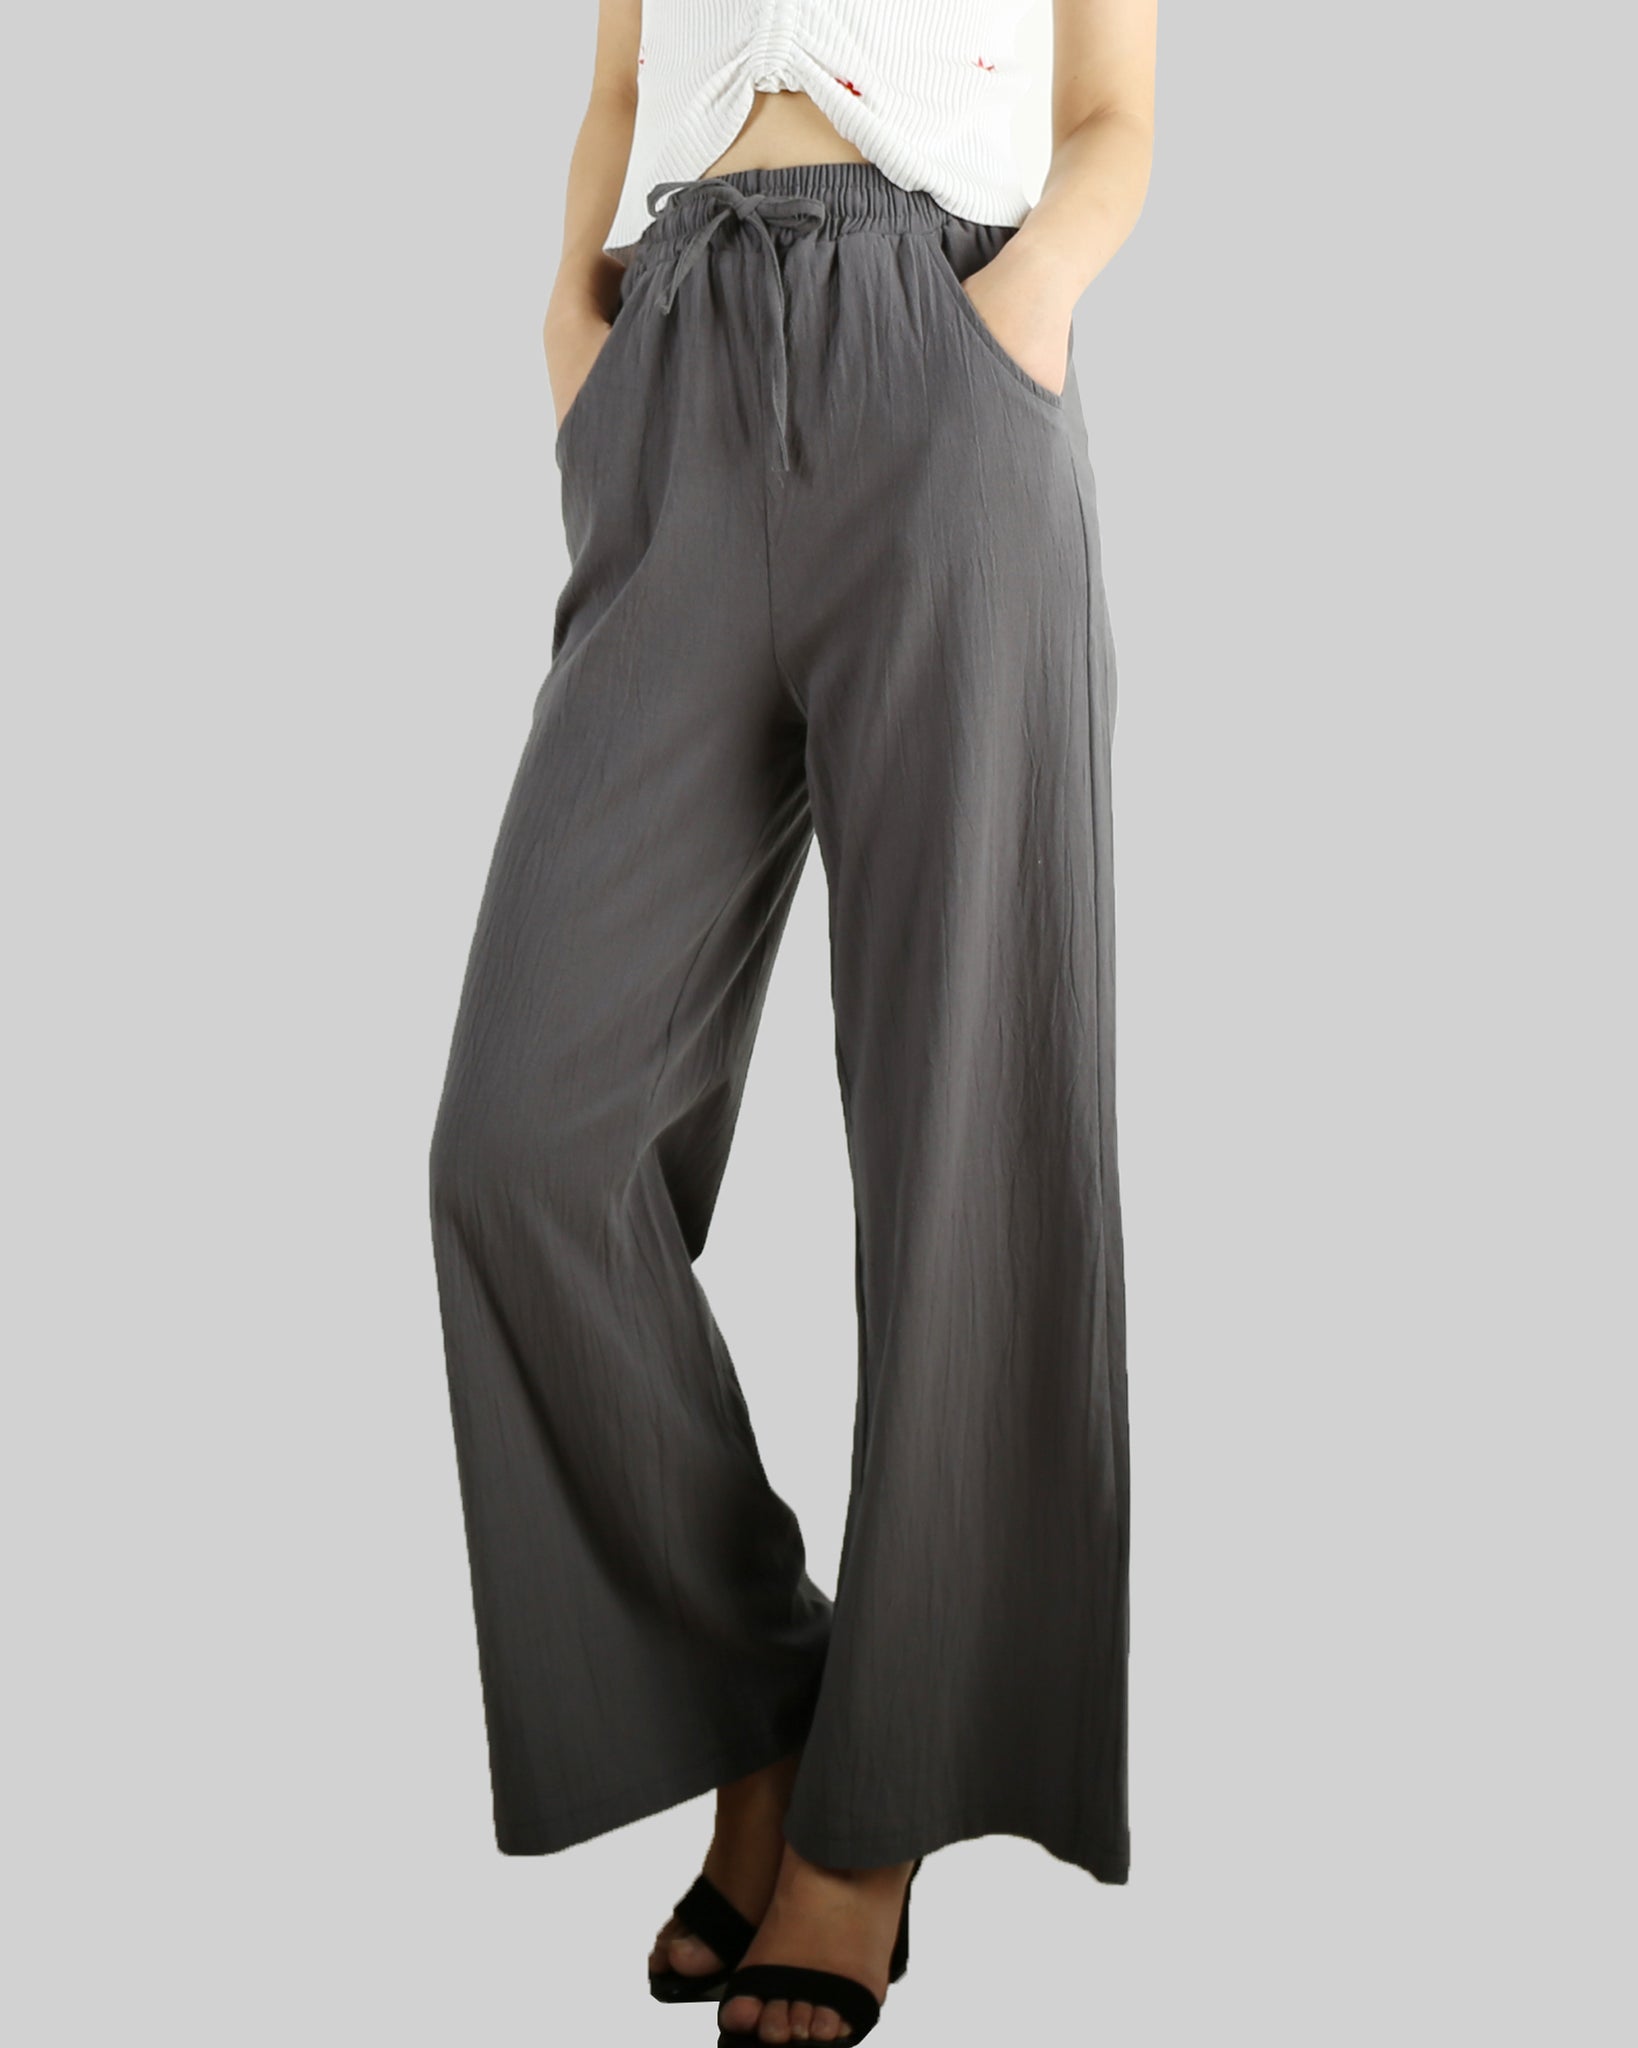 PLUS SIZE Womens Wide Leg Baggy Loose Pants Summer Casual Long Trousers  Bottoms+ | eBay